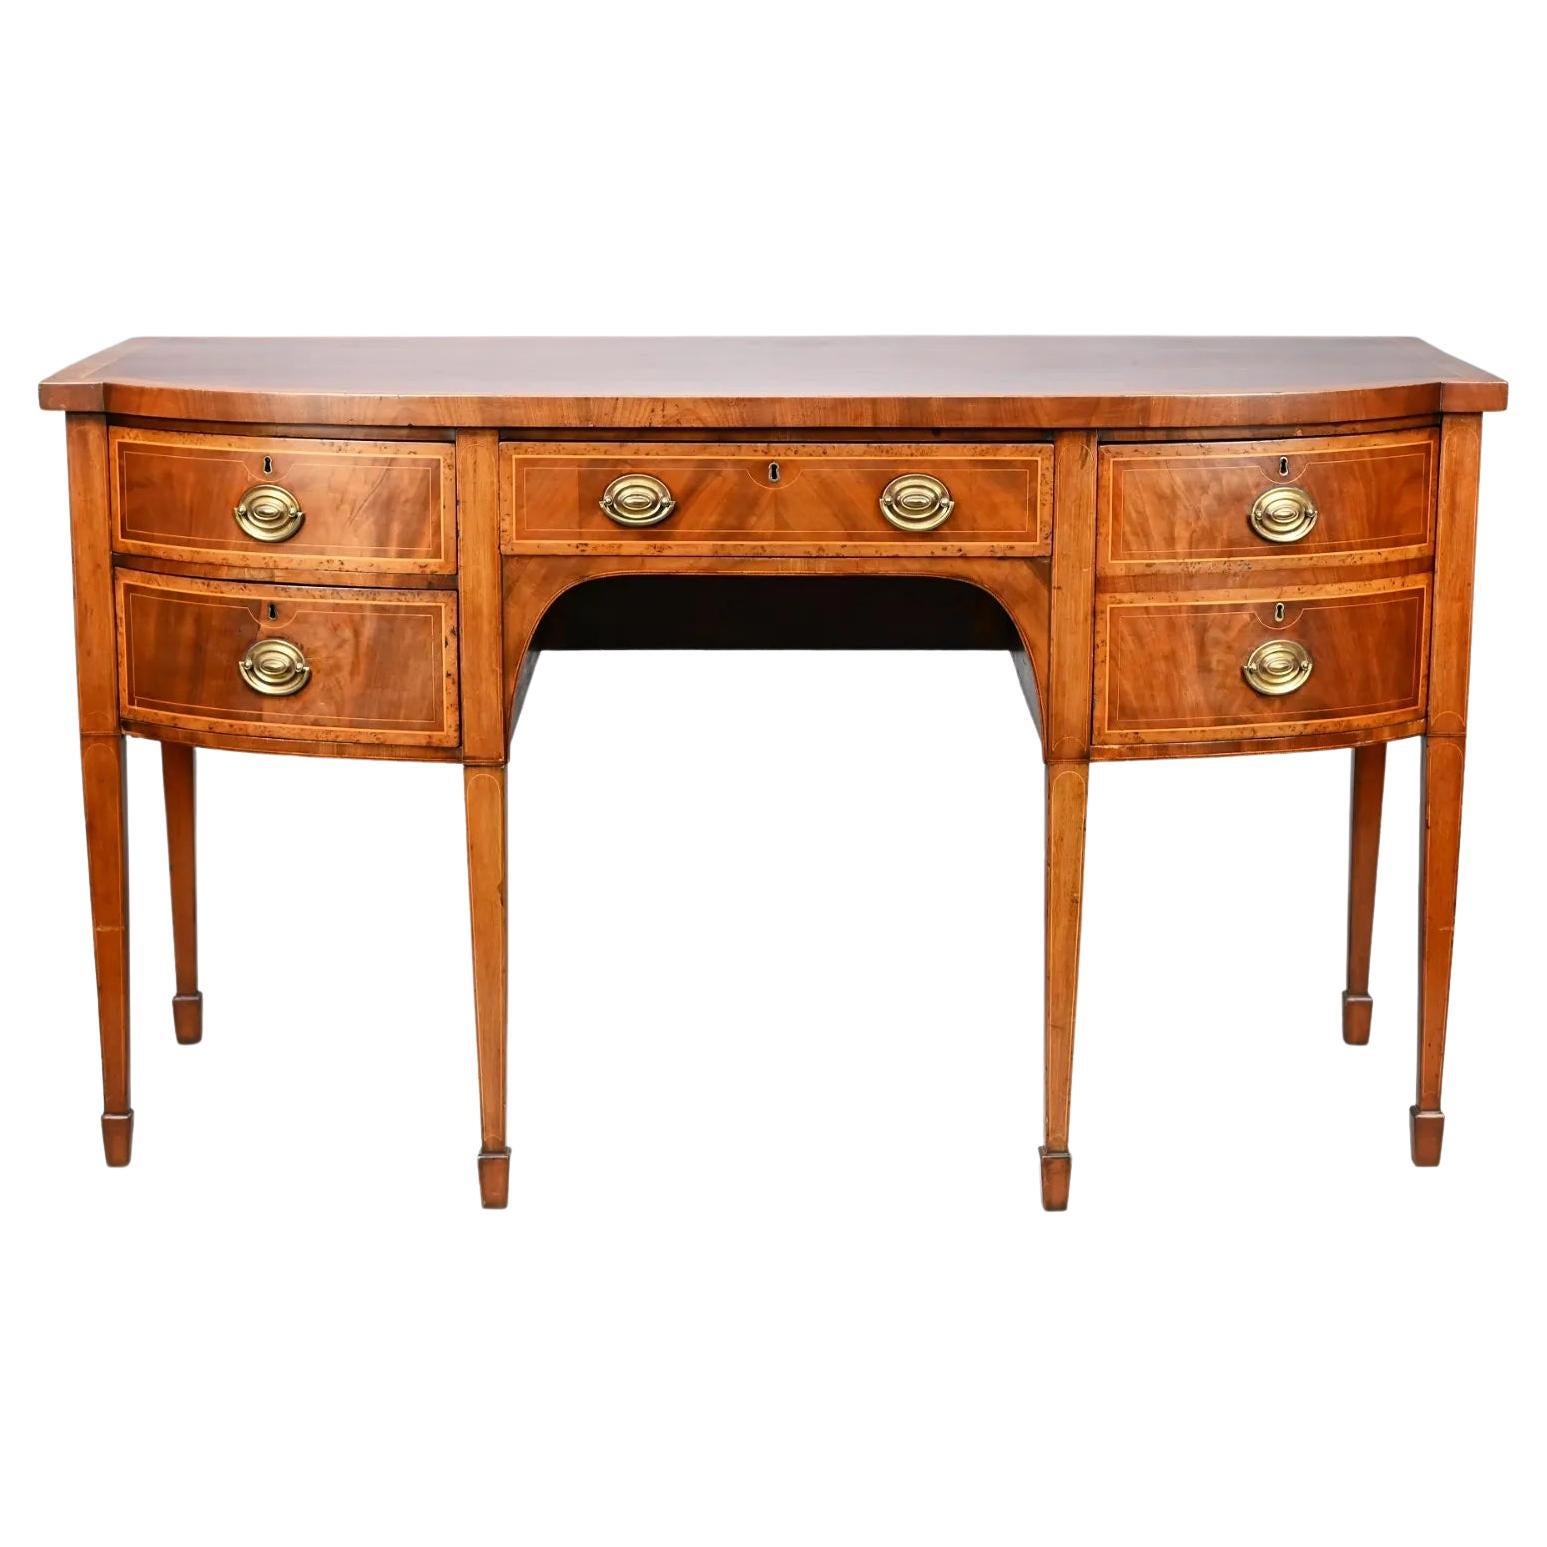 Early 19th Century George III Mahogany Sideboard For Sale